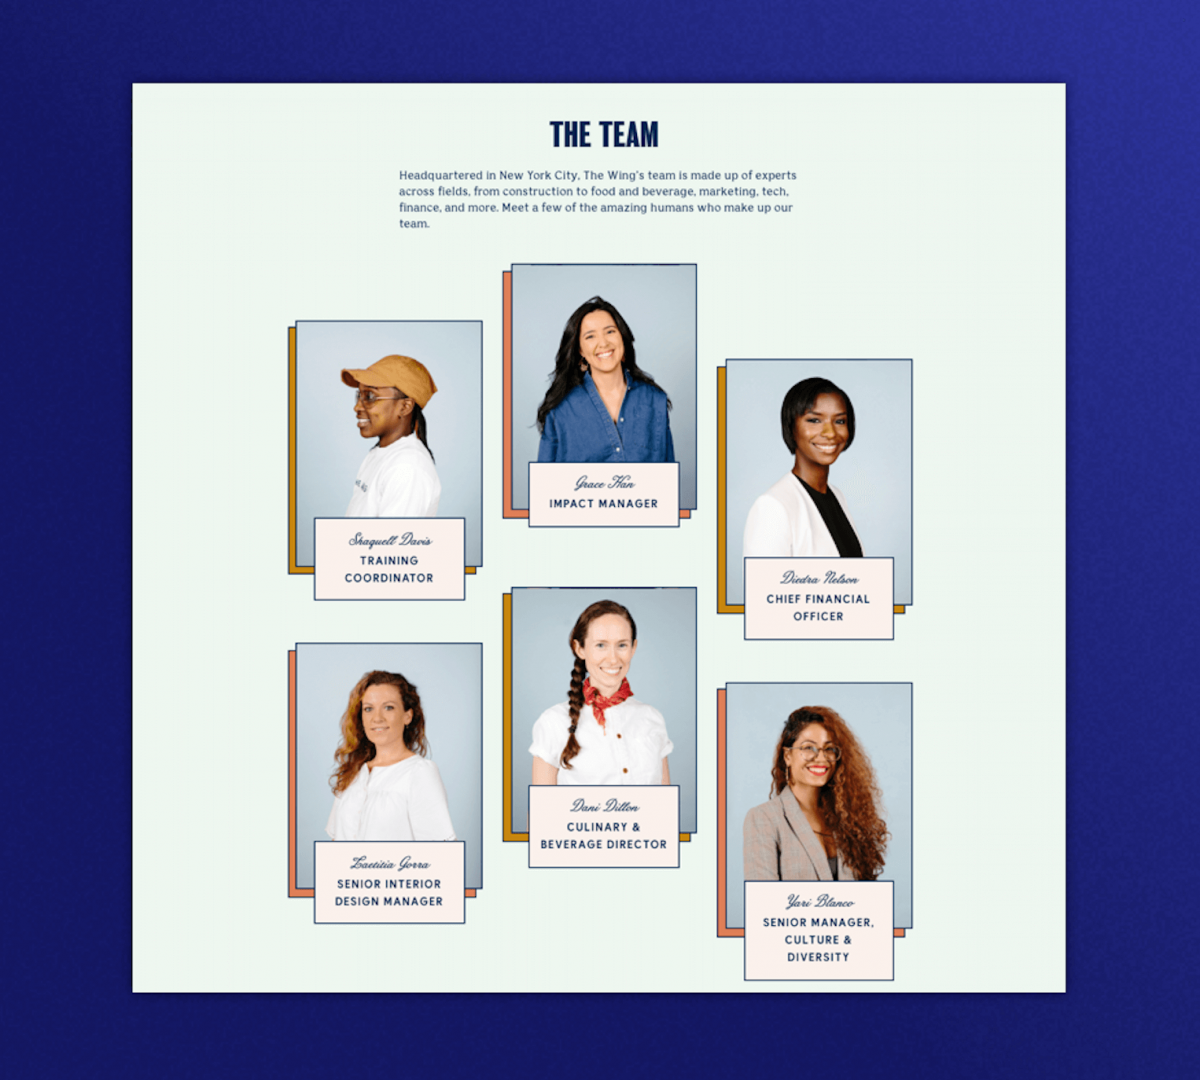 Team section for The Wing's website with images of 6 diverse women in their leadership team